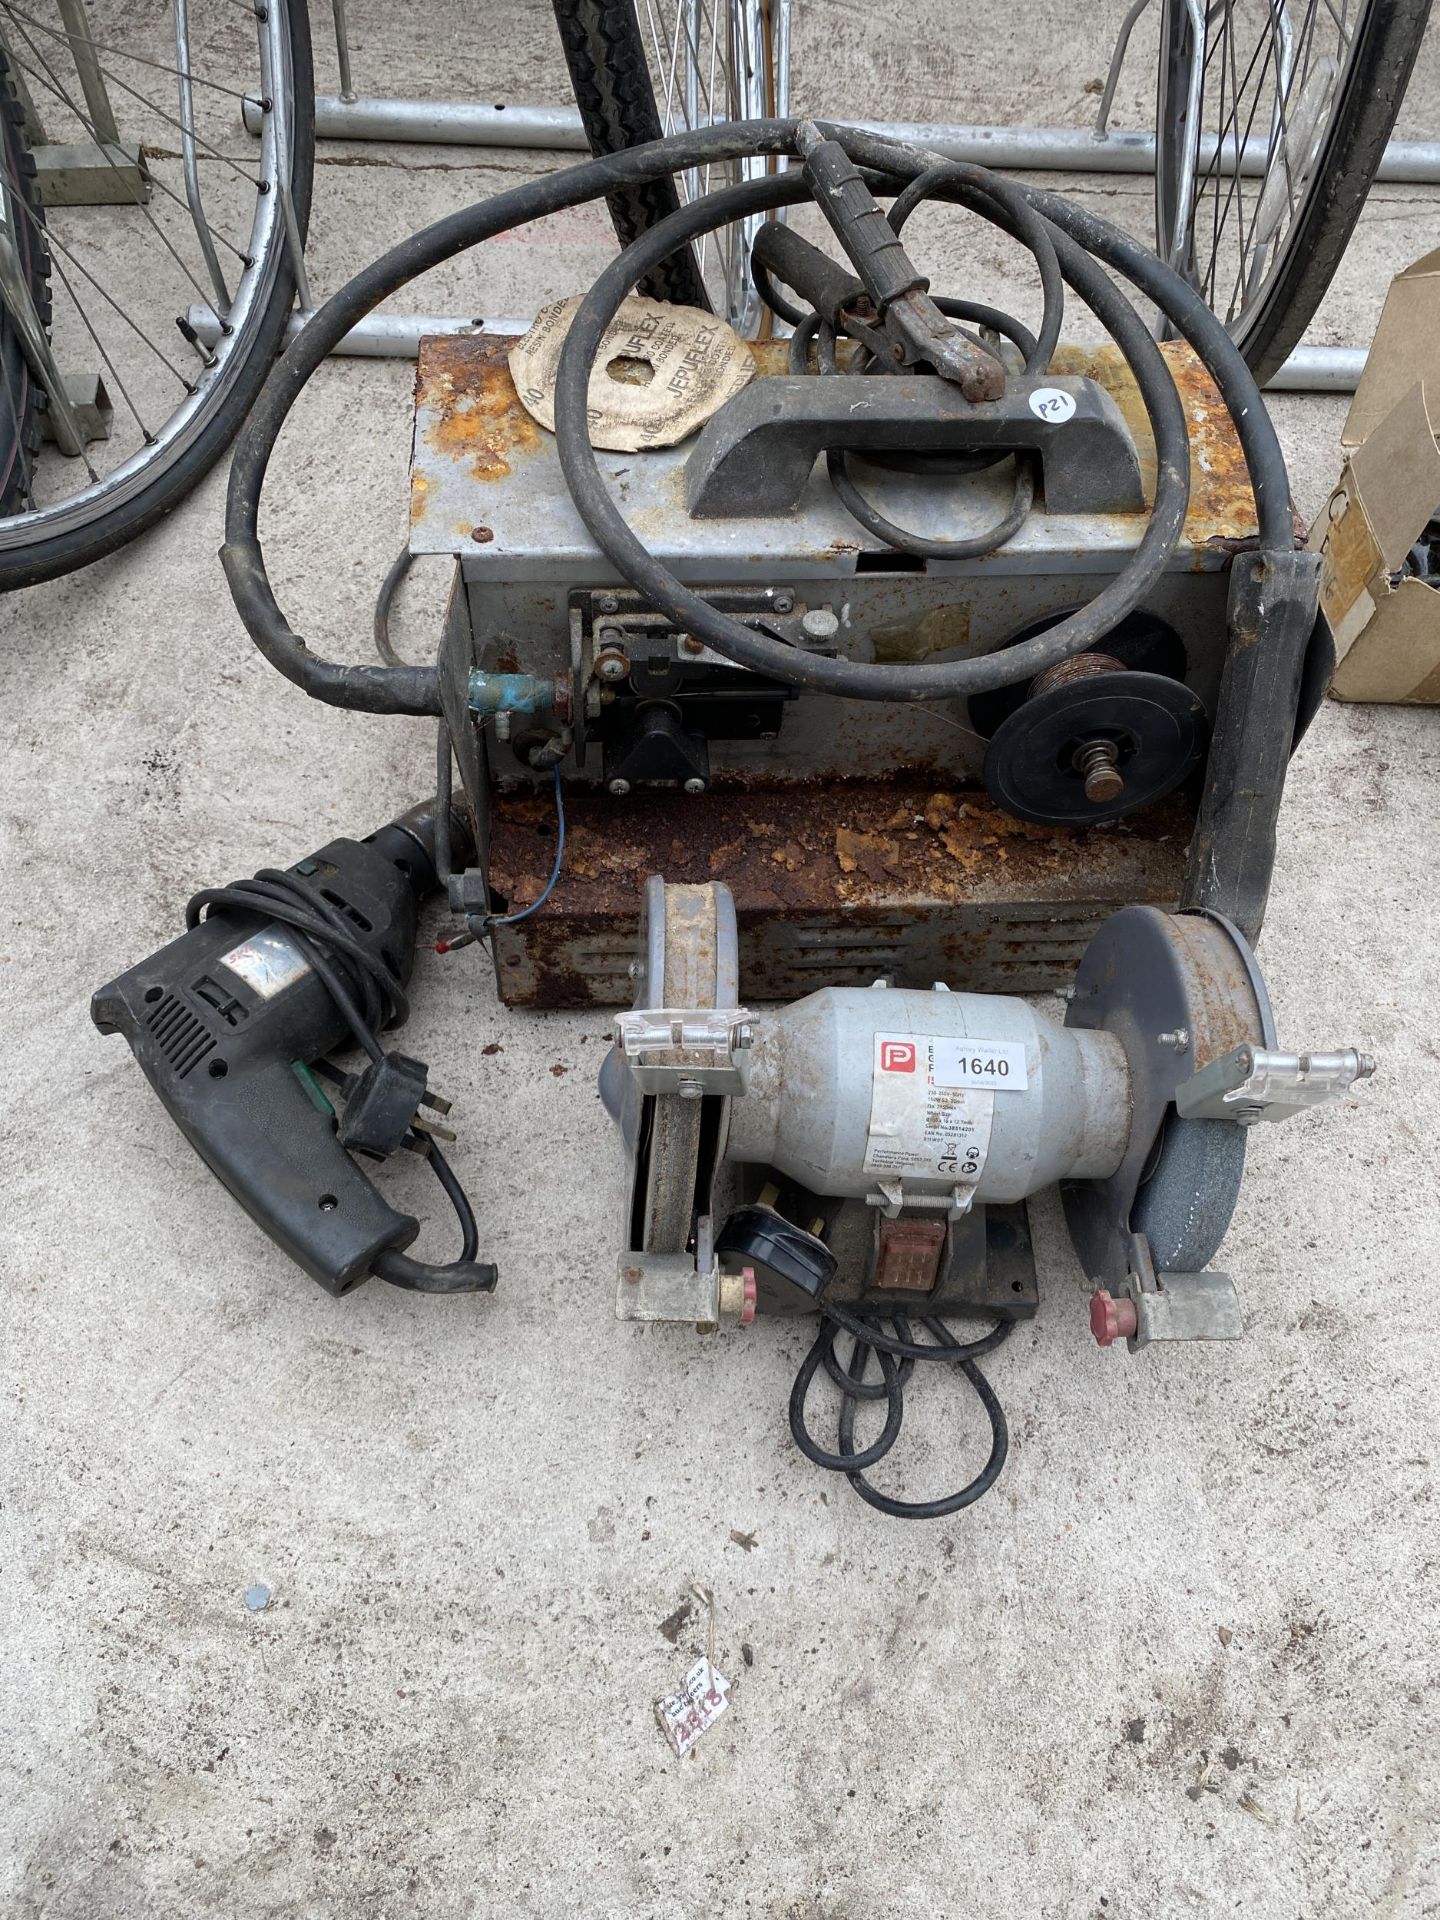 A PROFORMANCE BENCH GRINDER, AN ELECTRIC DRILL AND A MIG WELDER